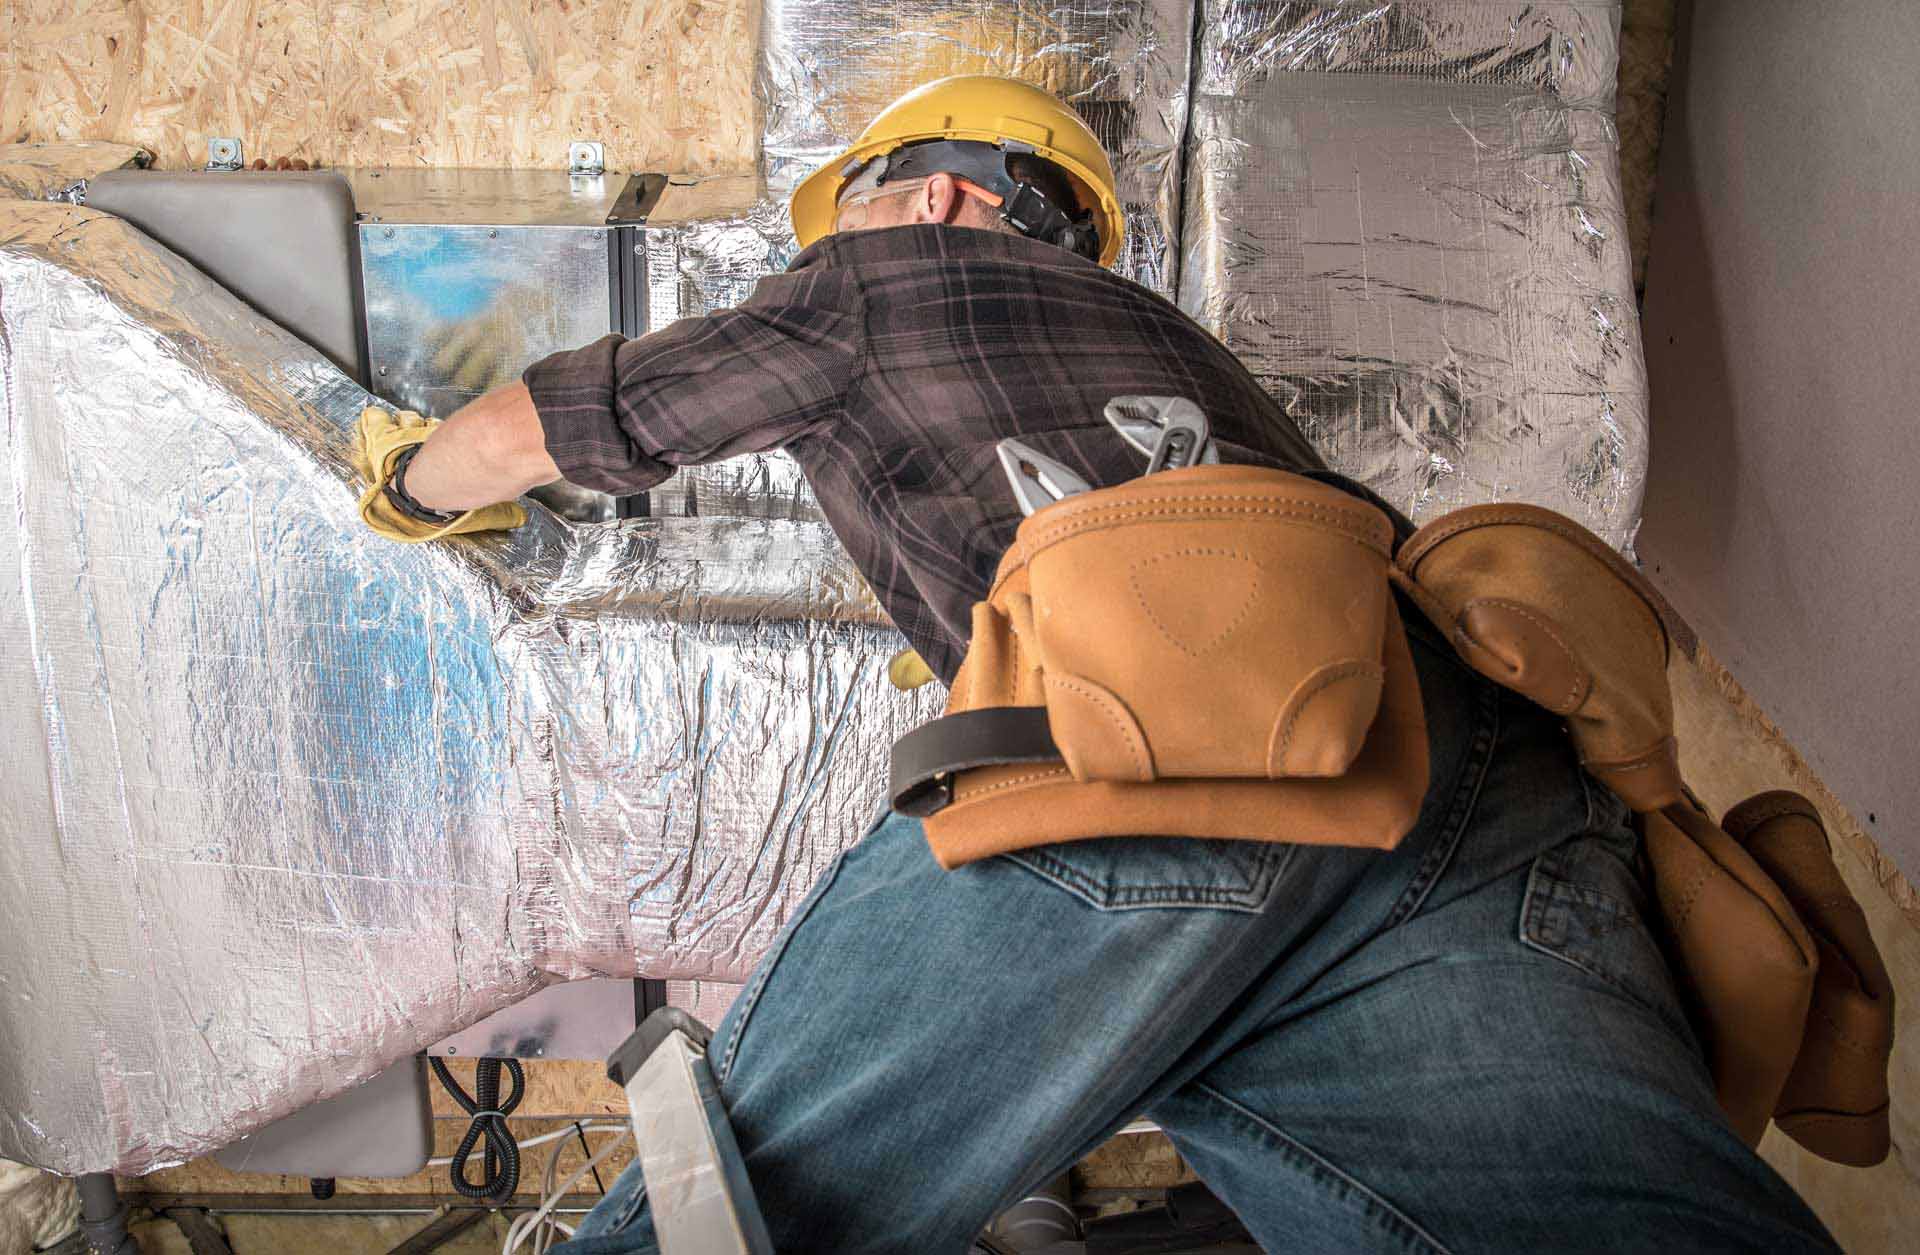 A worker in a hard hat and gloves installs water softening insulation in a wall, wearing a tool belt.